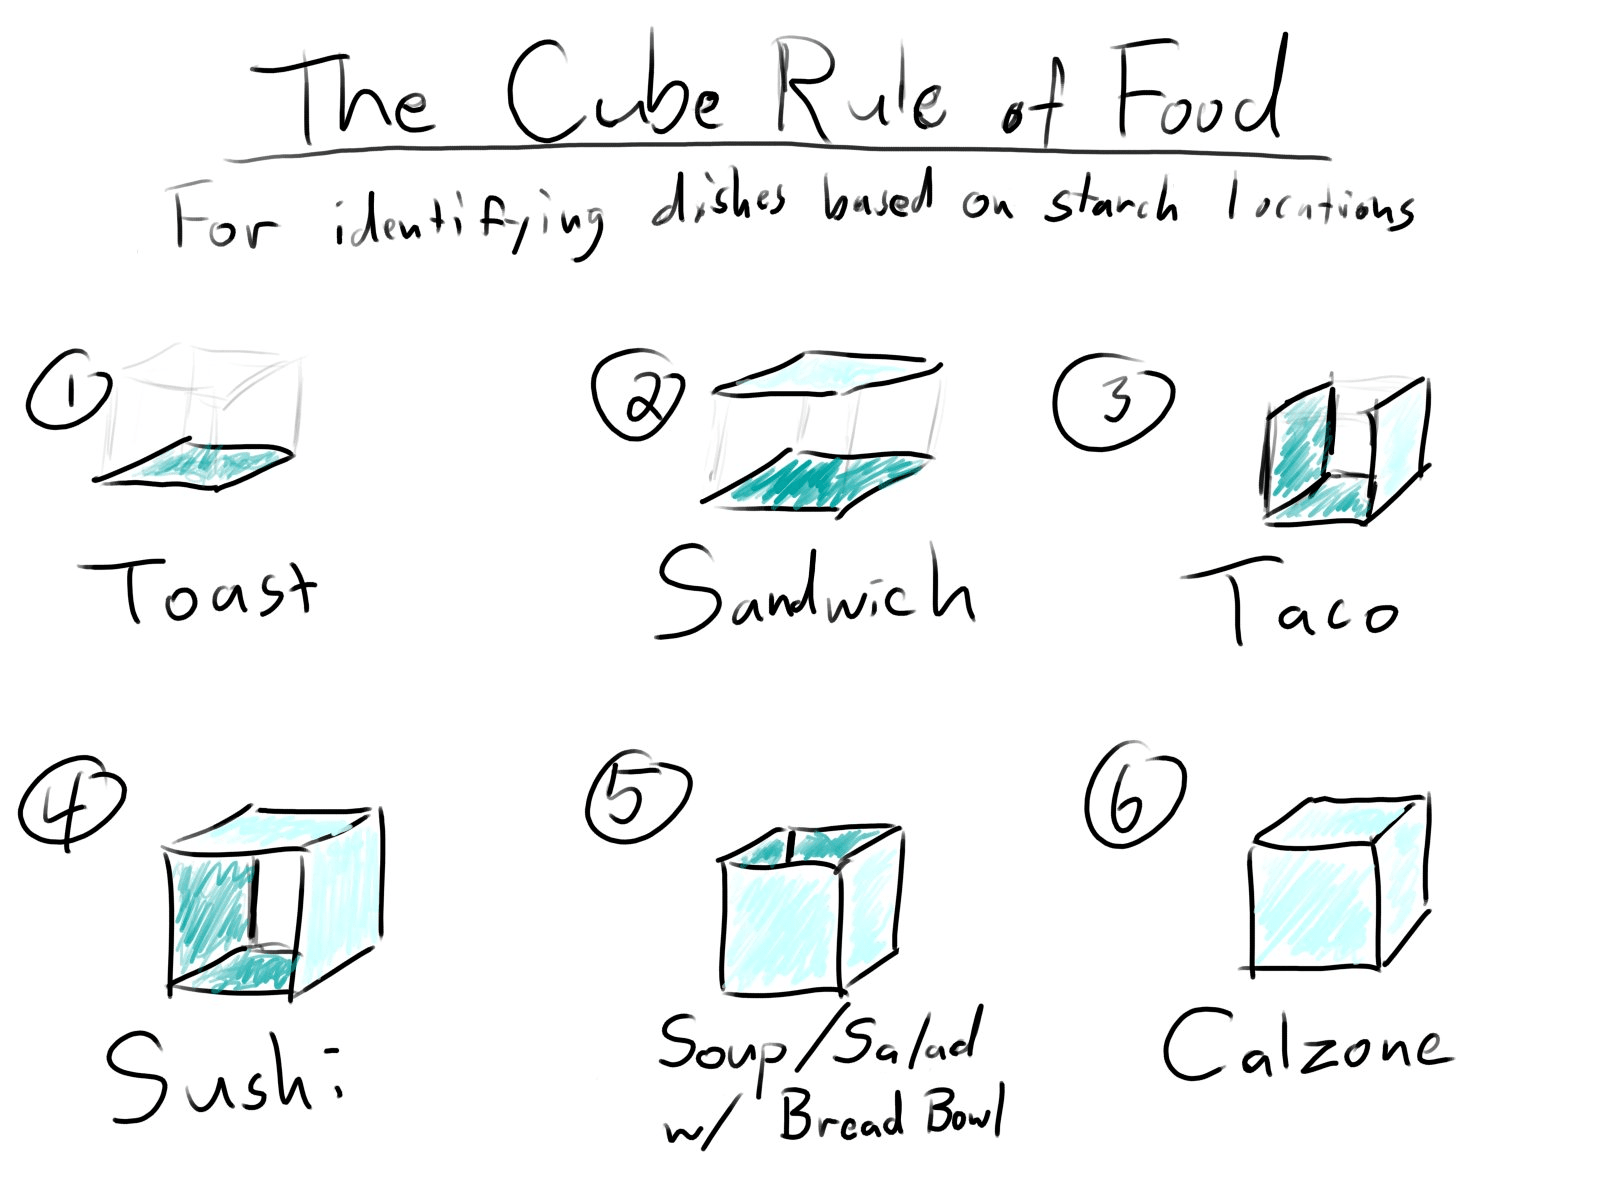 The original cube theory image.